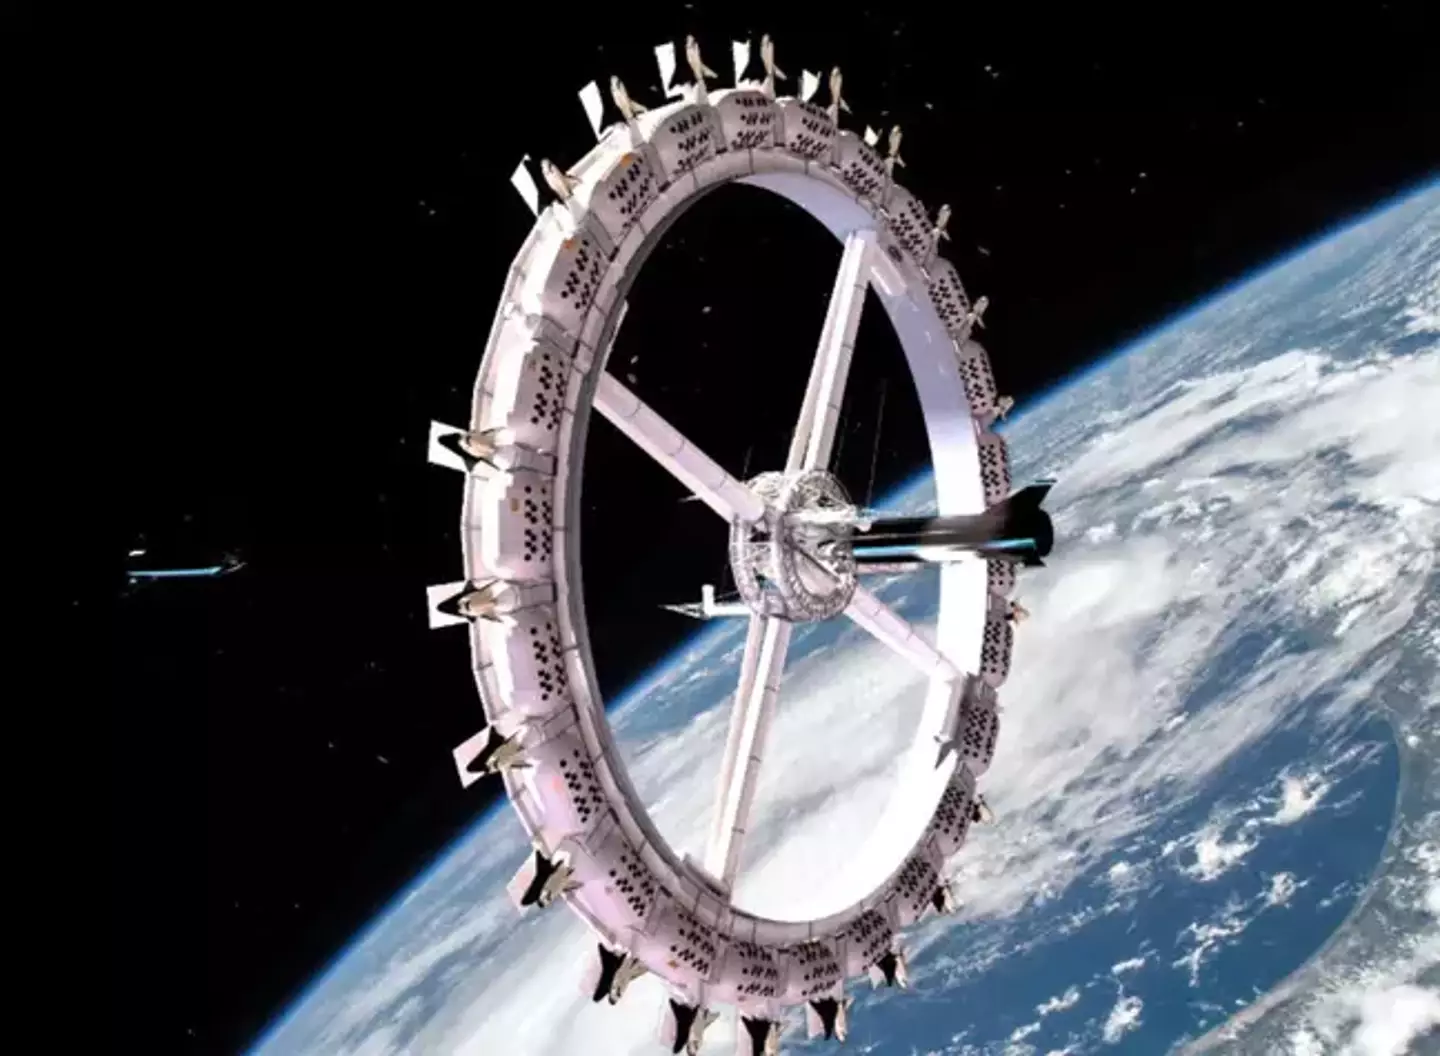 There will also be a second station, Voyager, launched in 2027. The space hotel could open in just two years.